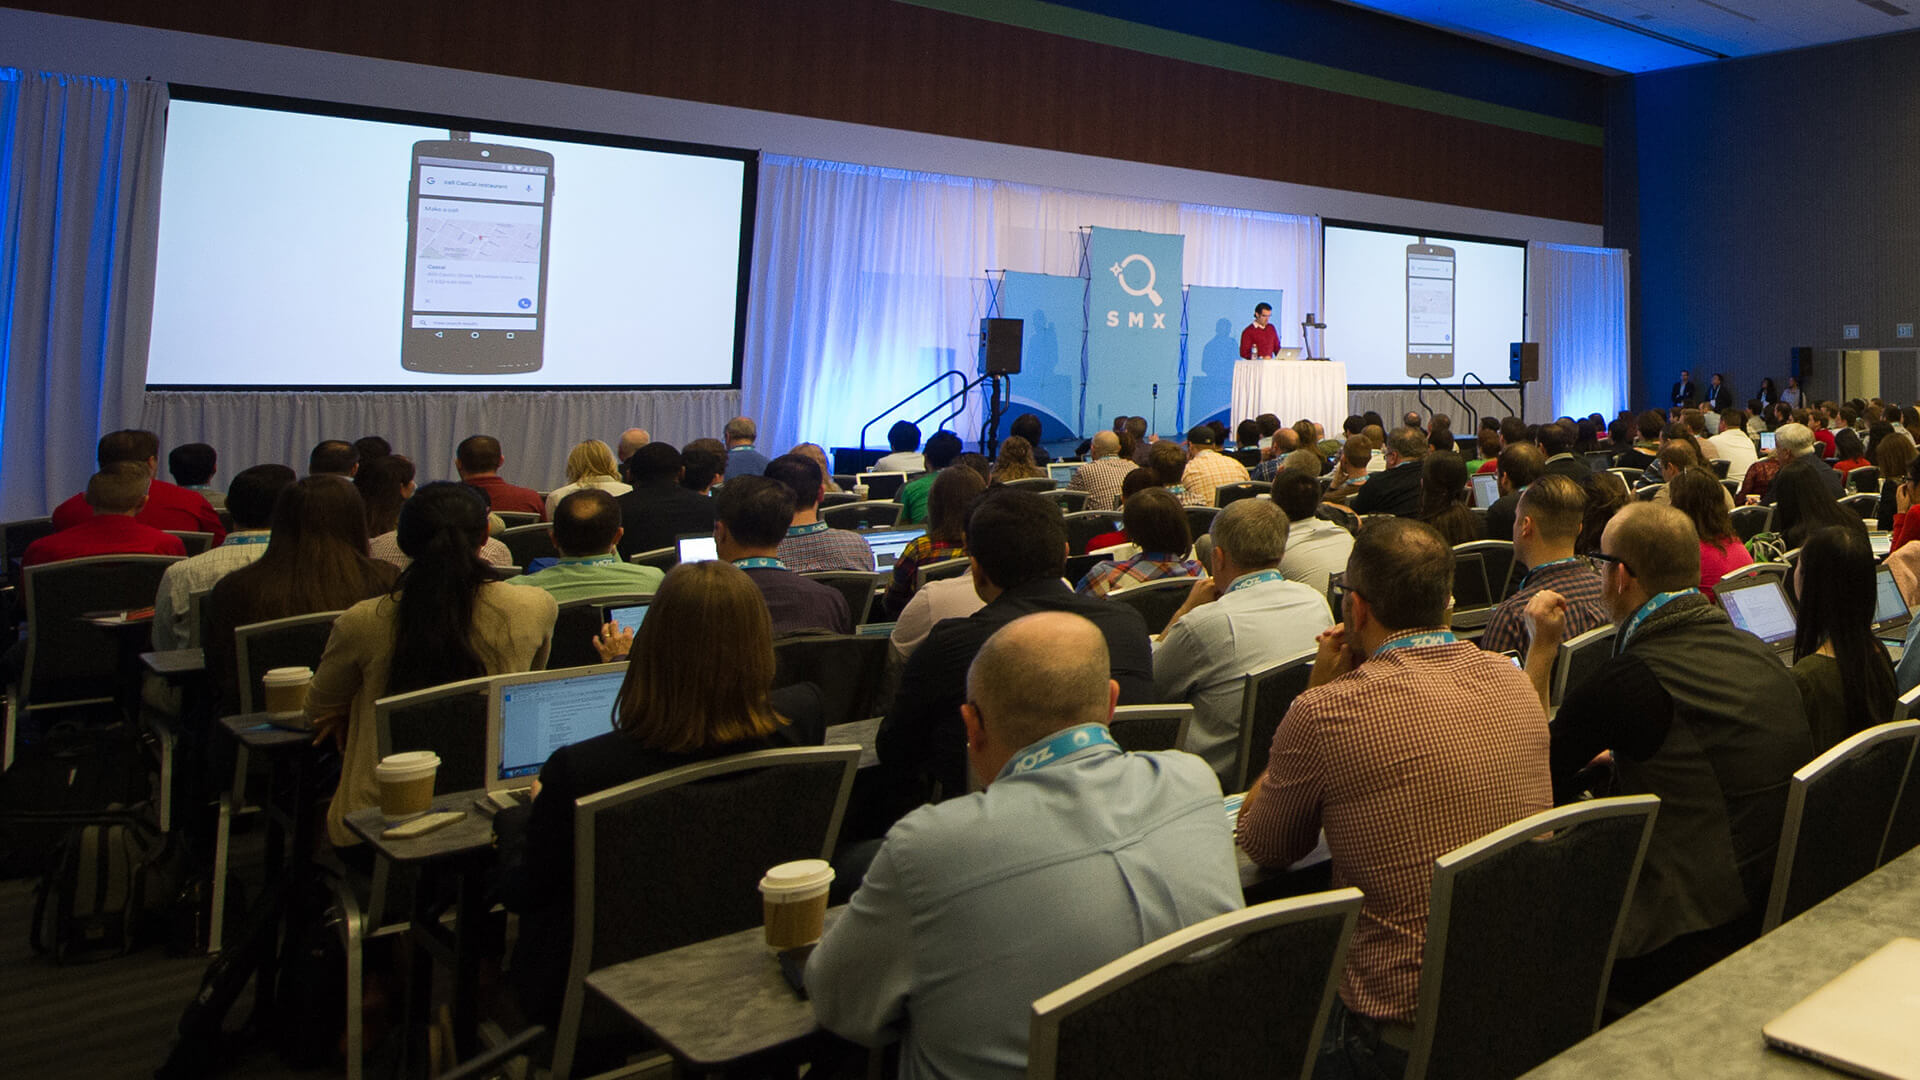 SMX – Search Marketing Expo